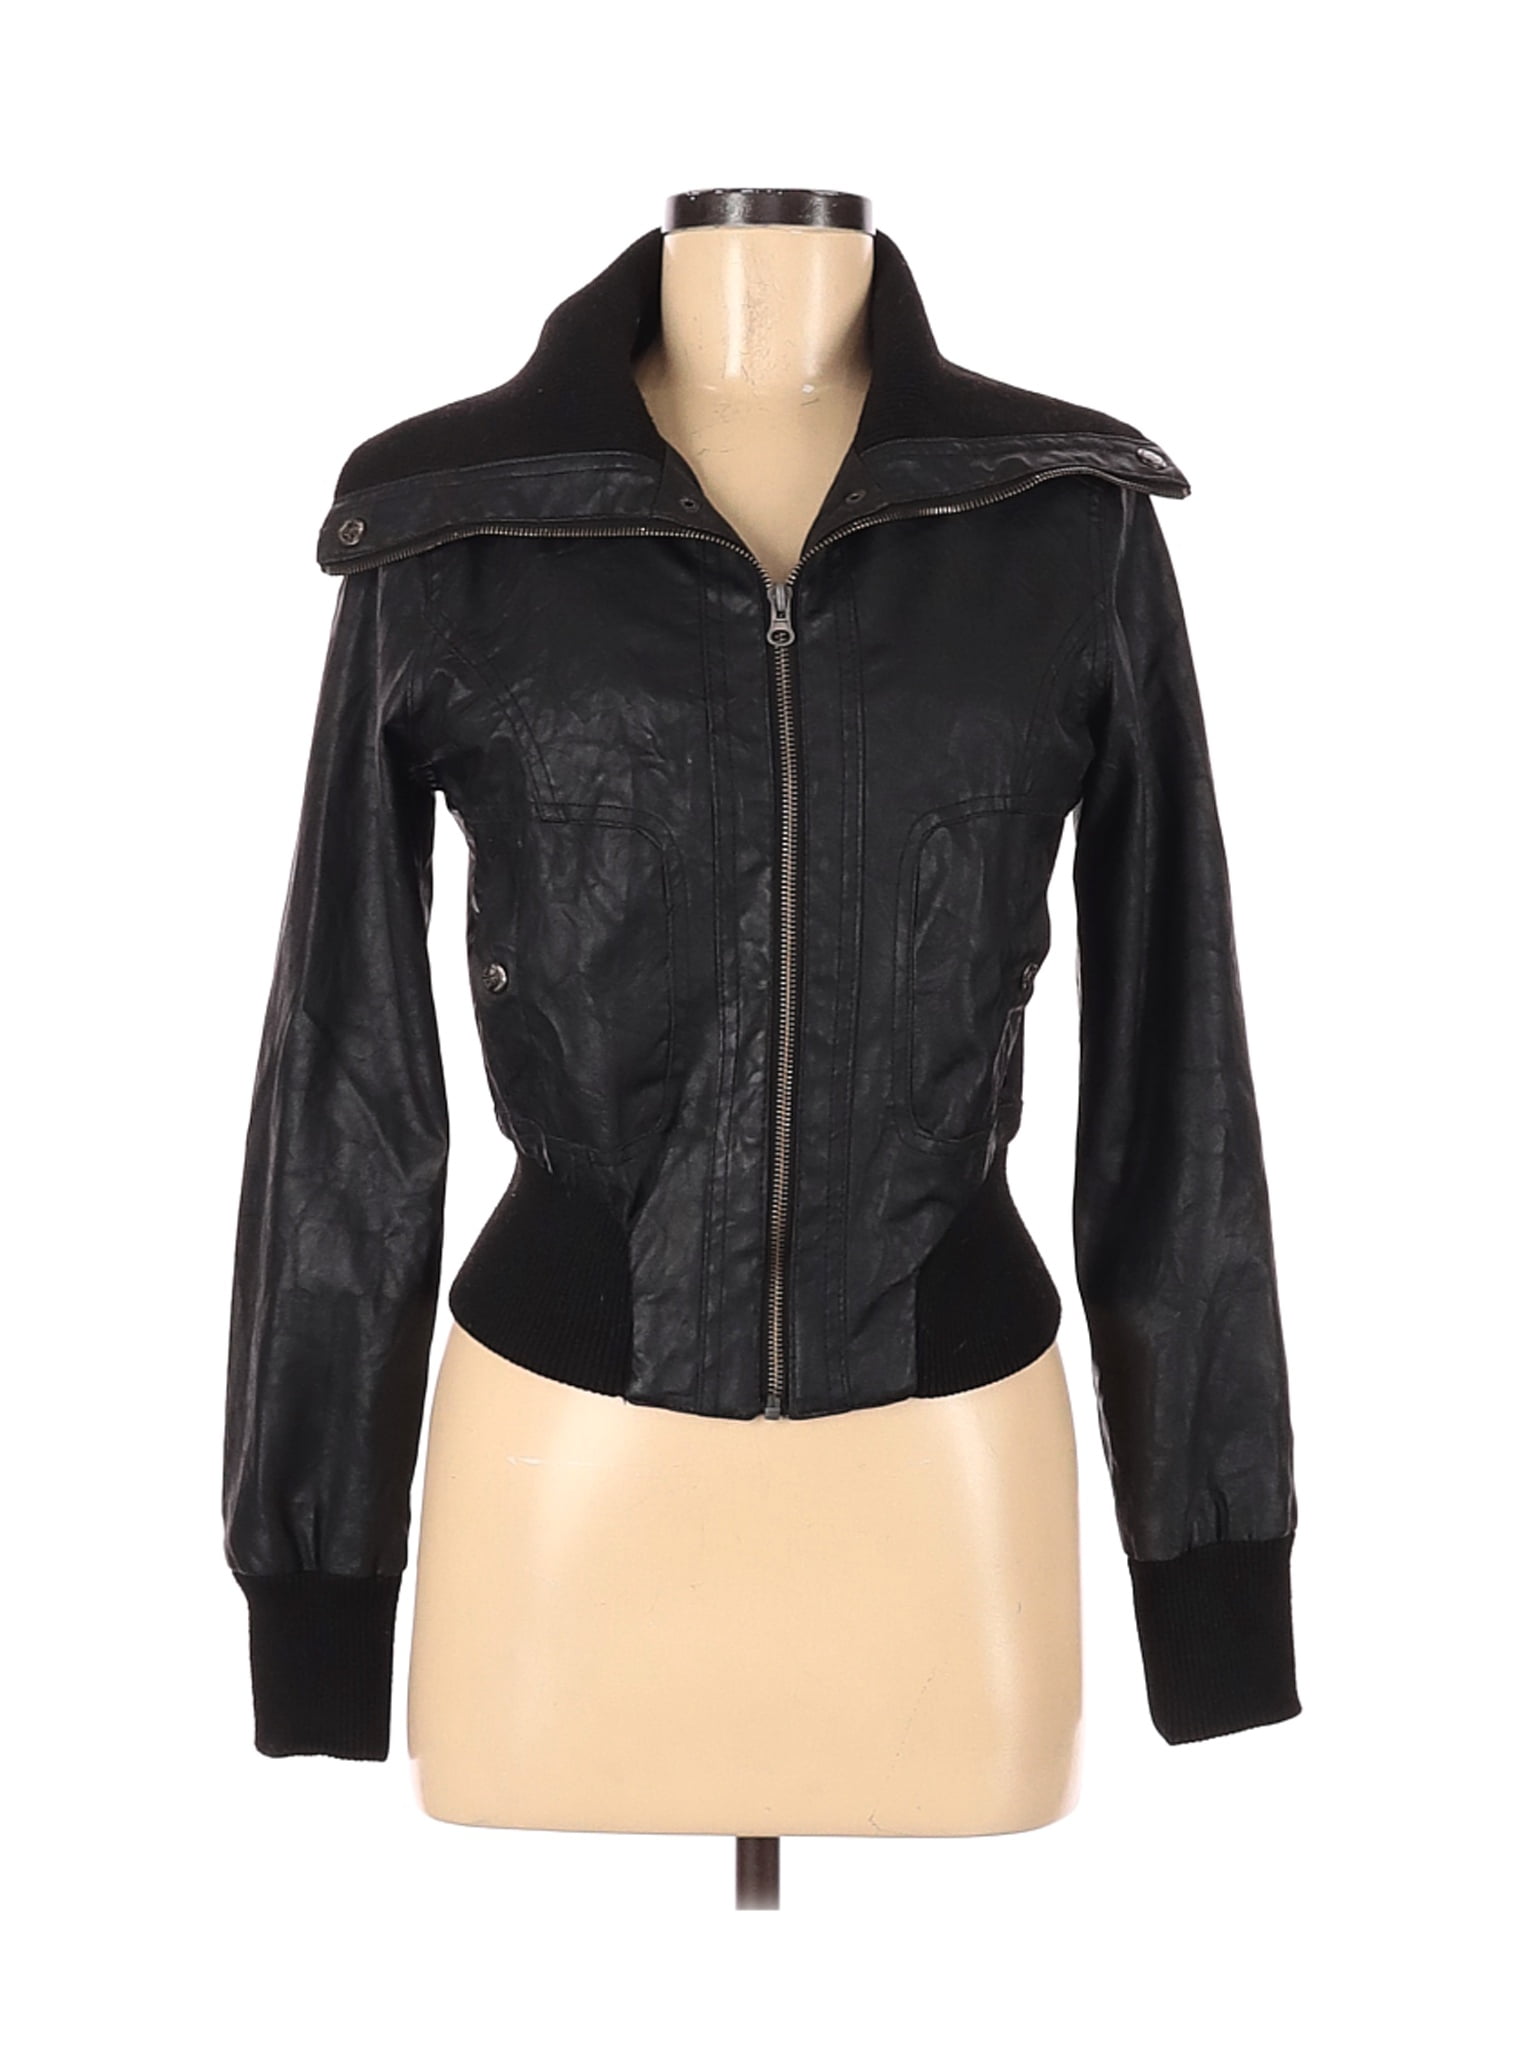 beverly hills polo club leather jacket